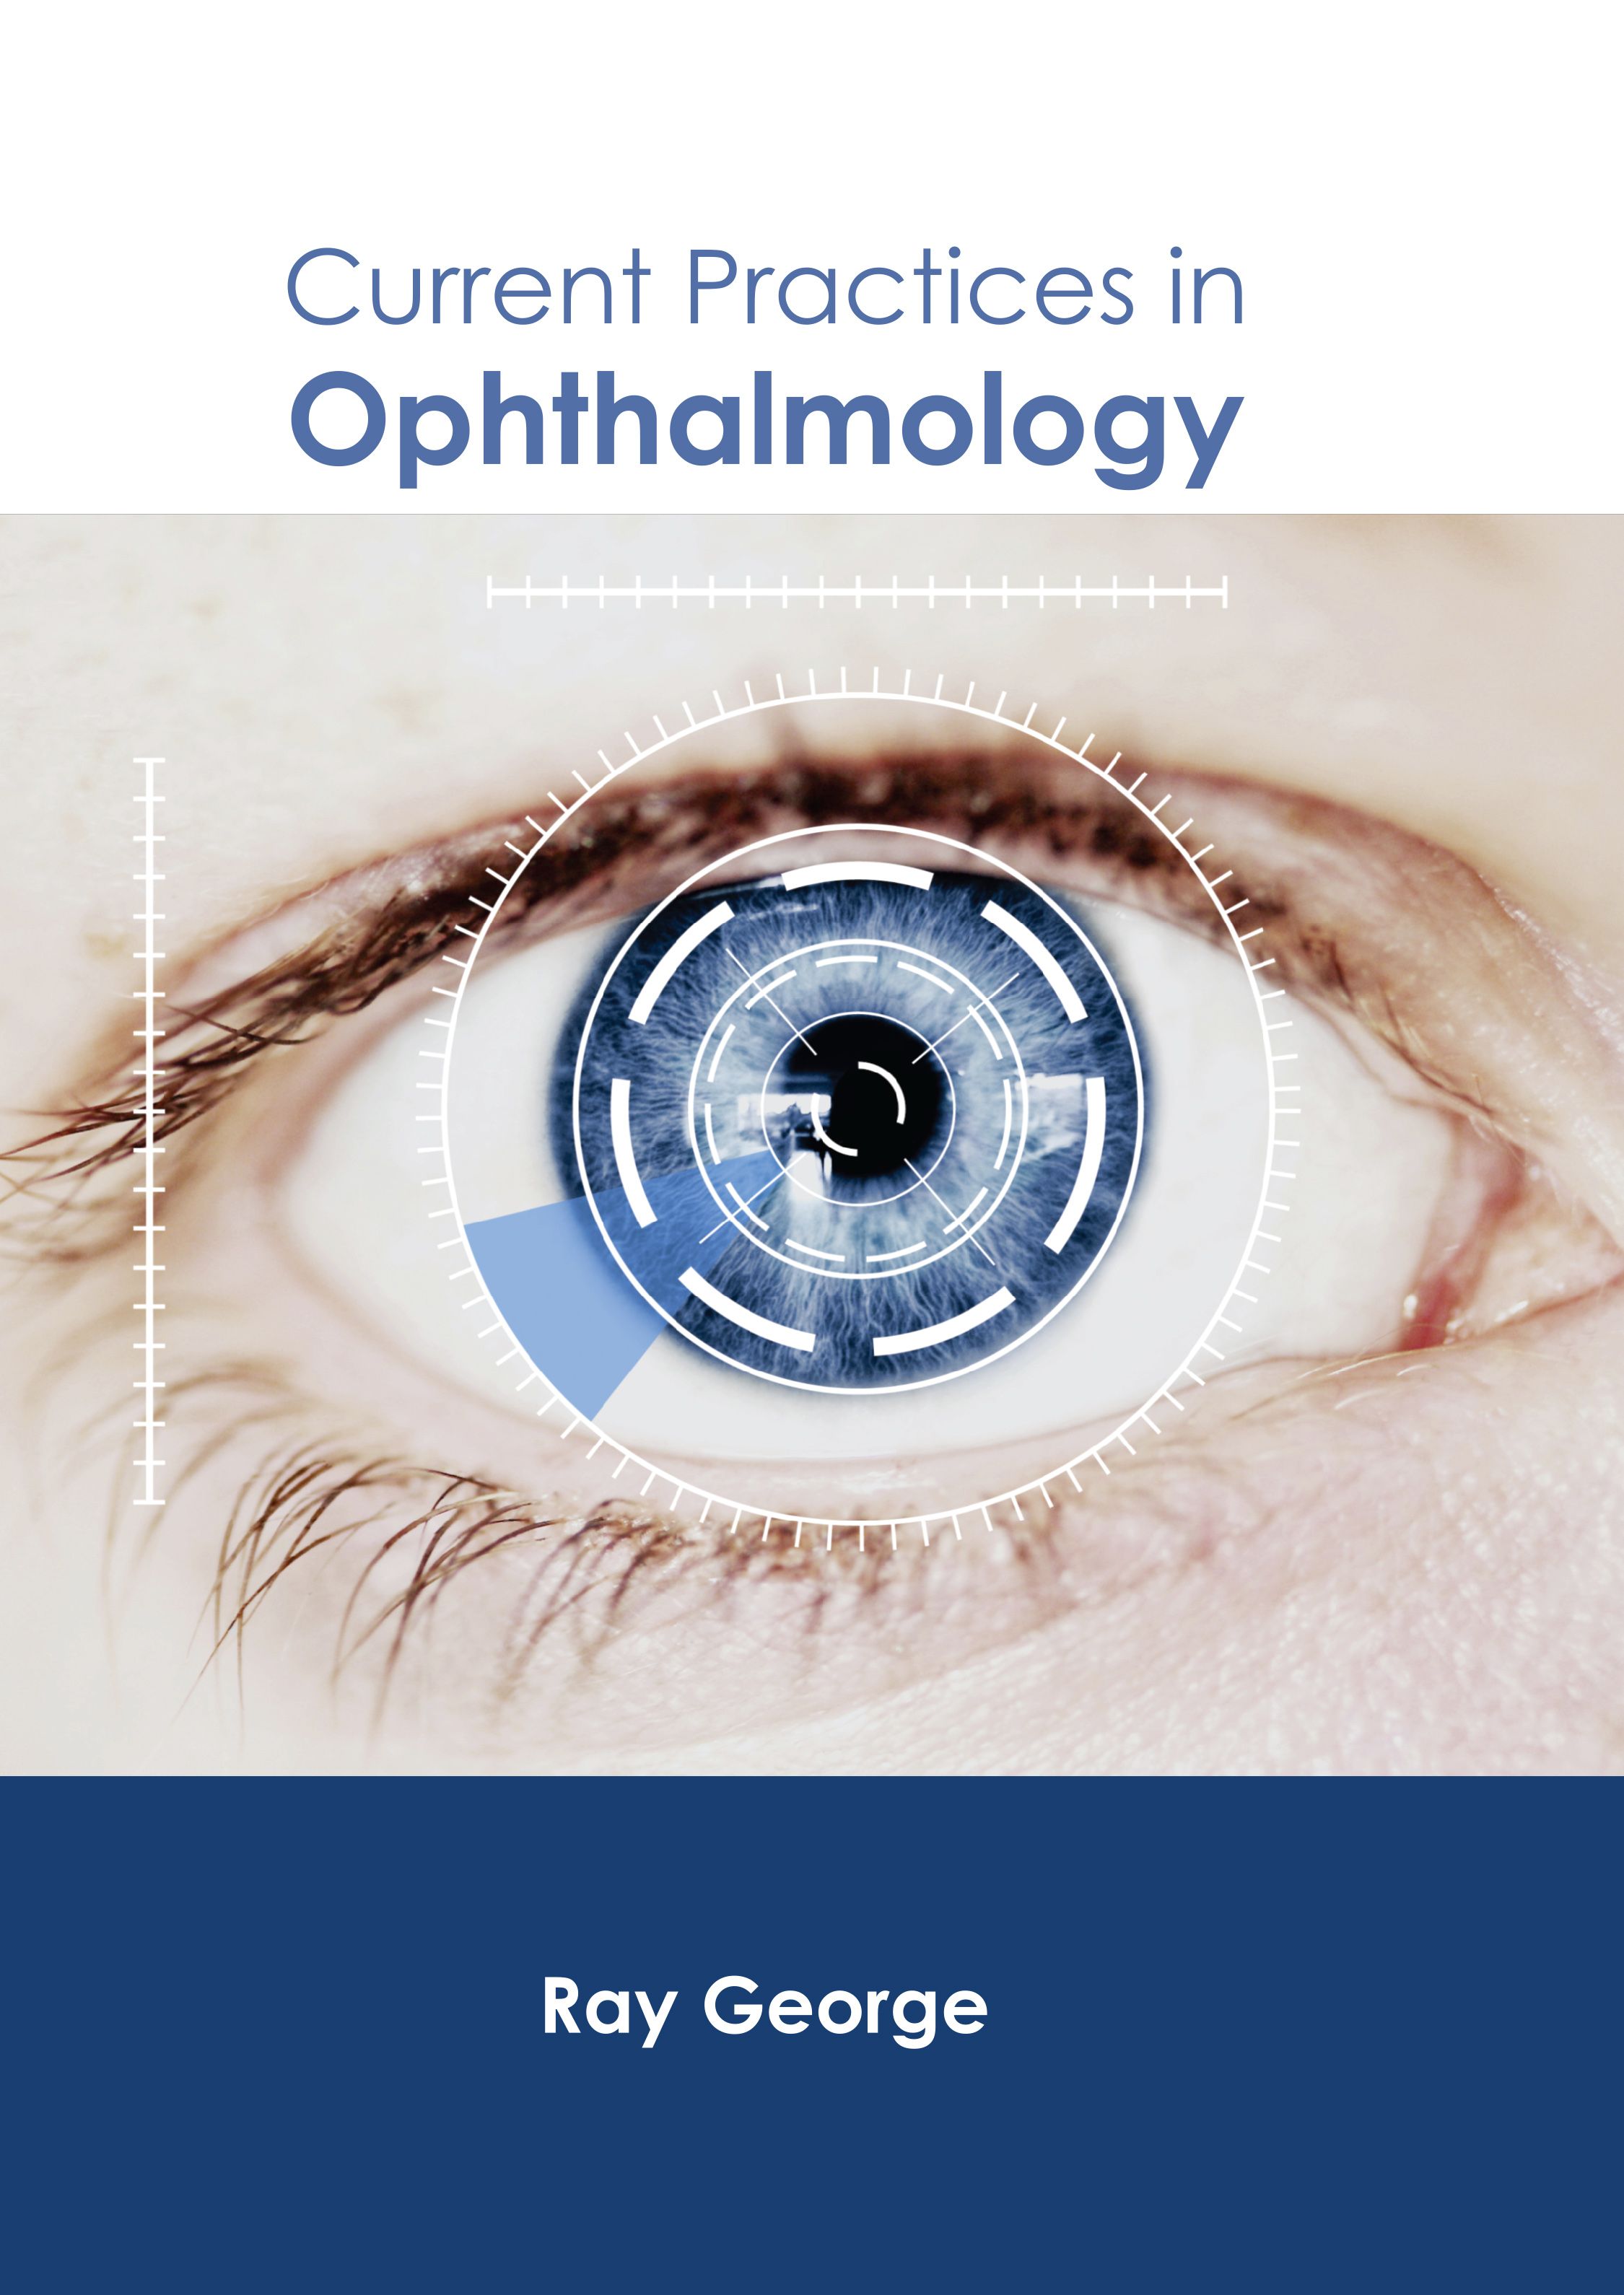 CURRENT PRACTICES IN OPHTHALMOLOGY